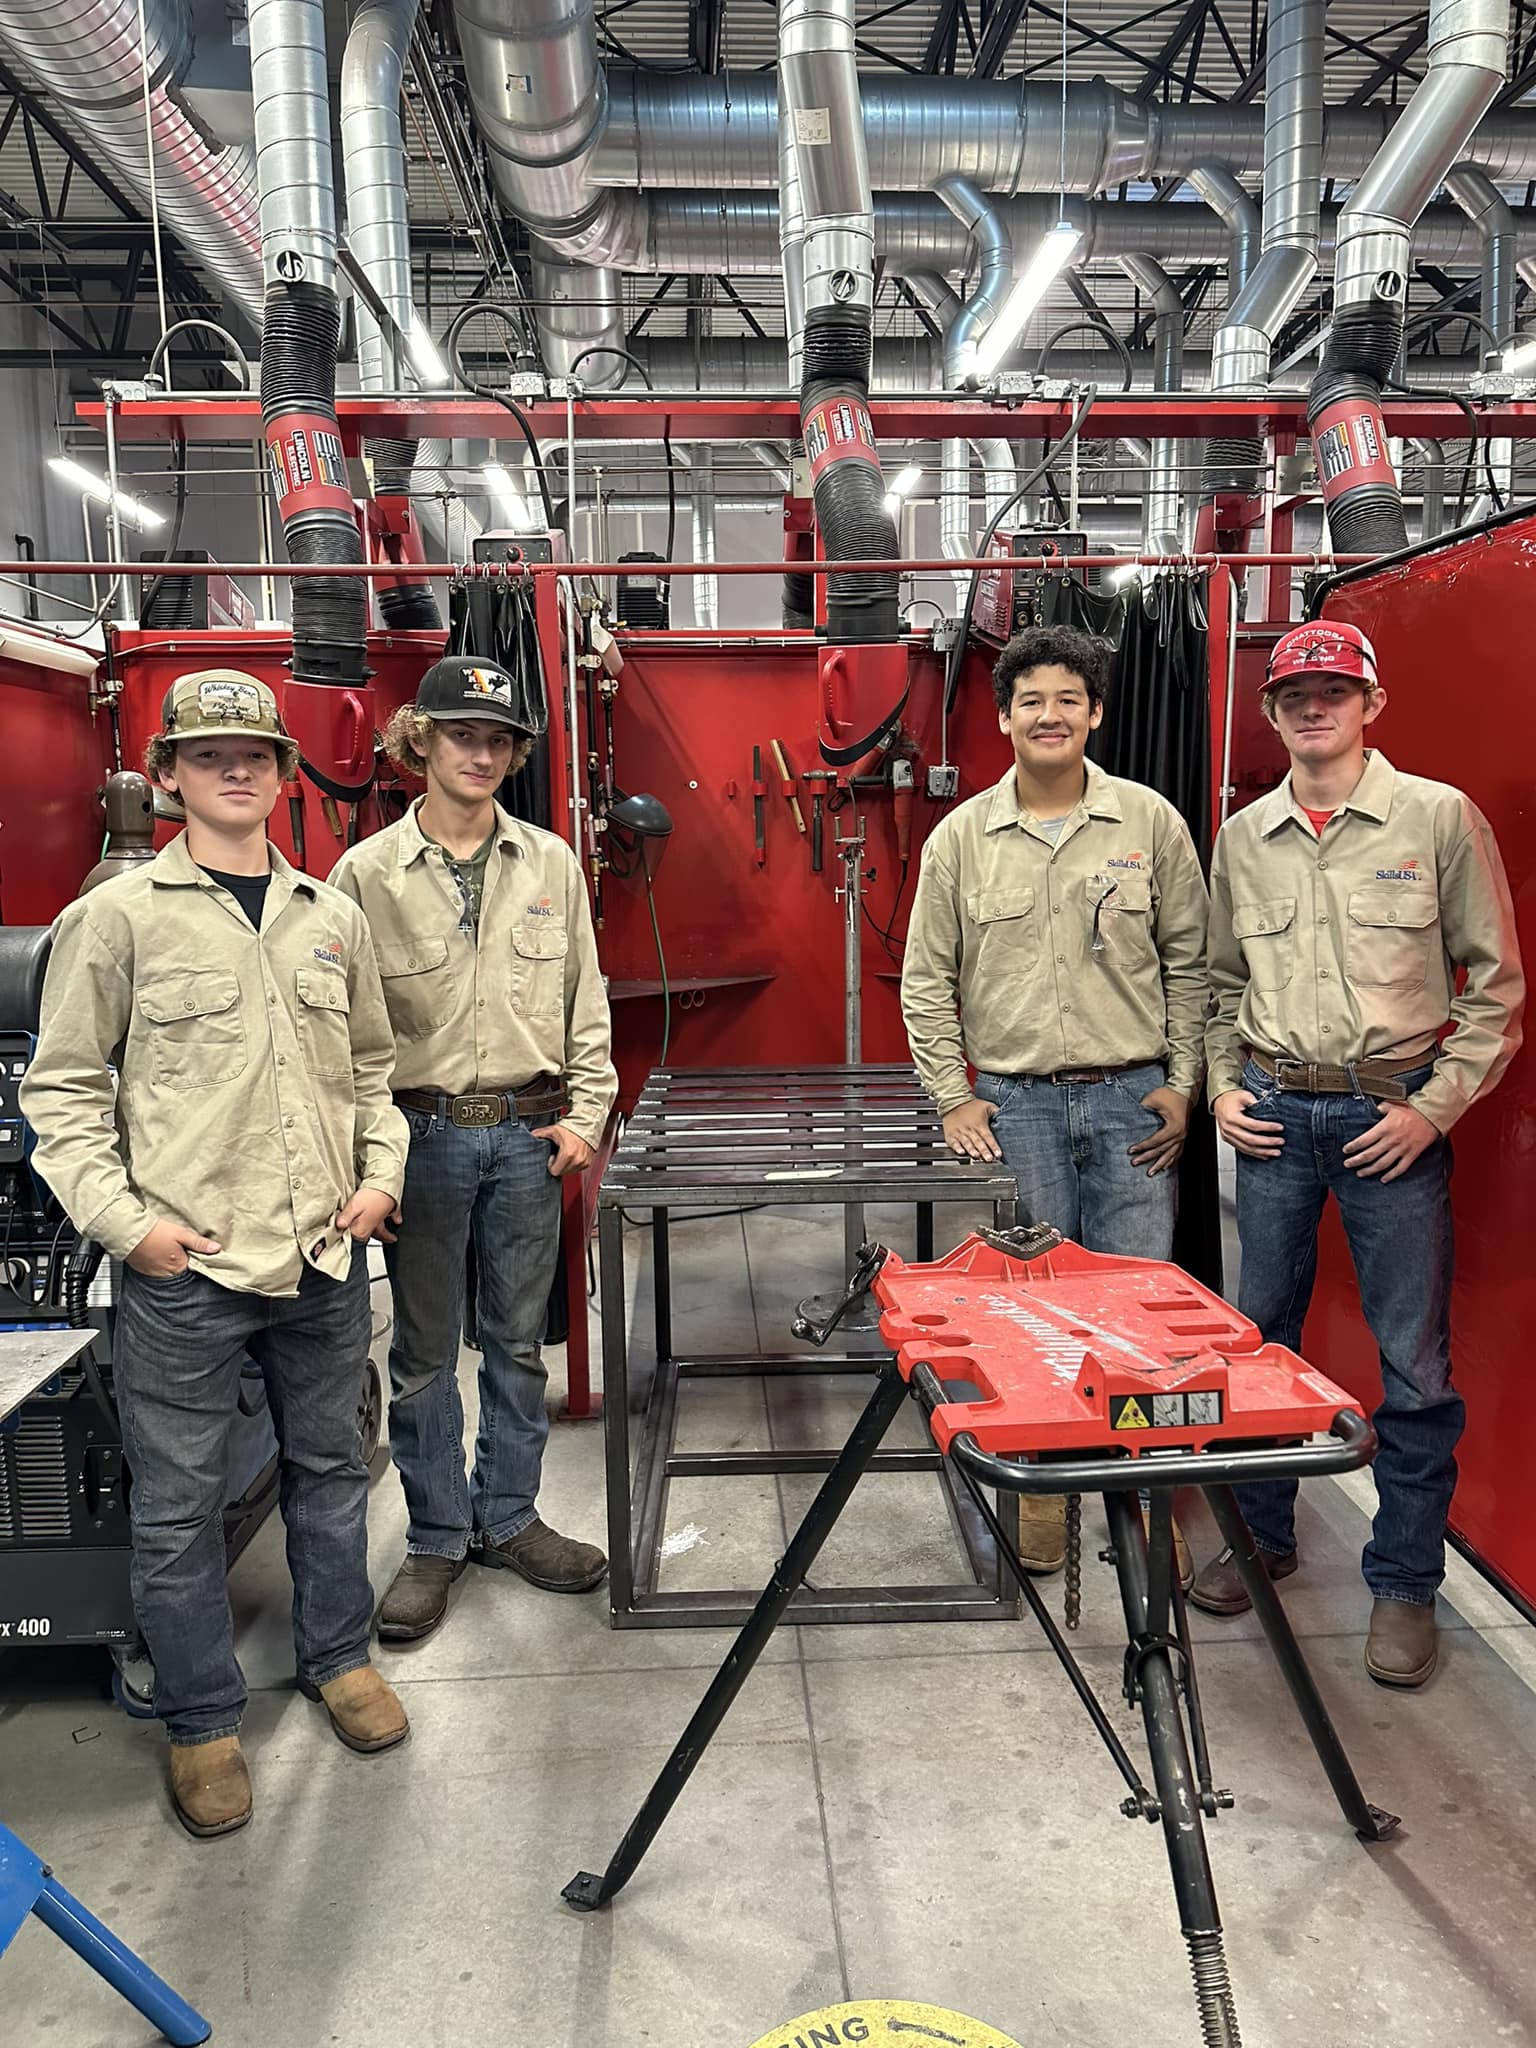 The Chattooga High School Welding Skills Team competed in the MTI-JATT welding competition in Atlanta, Ga.   Gunner Henderson, Evan Fletcher, Gavin Collier, and Connor Ray placed first in welding fabrication at the MTI-JATT welding competition in Atlanta, Ga. 